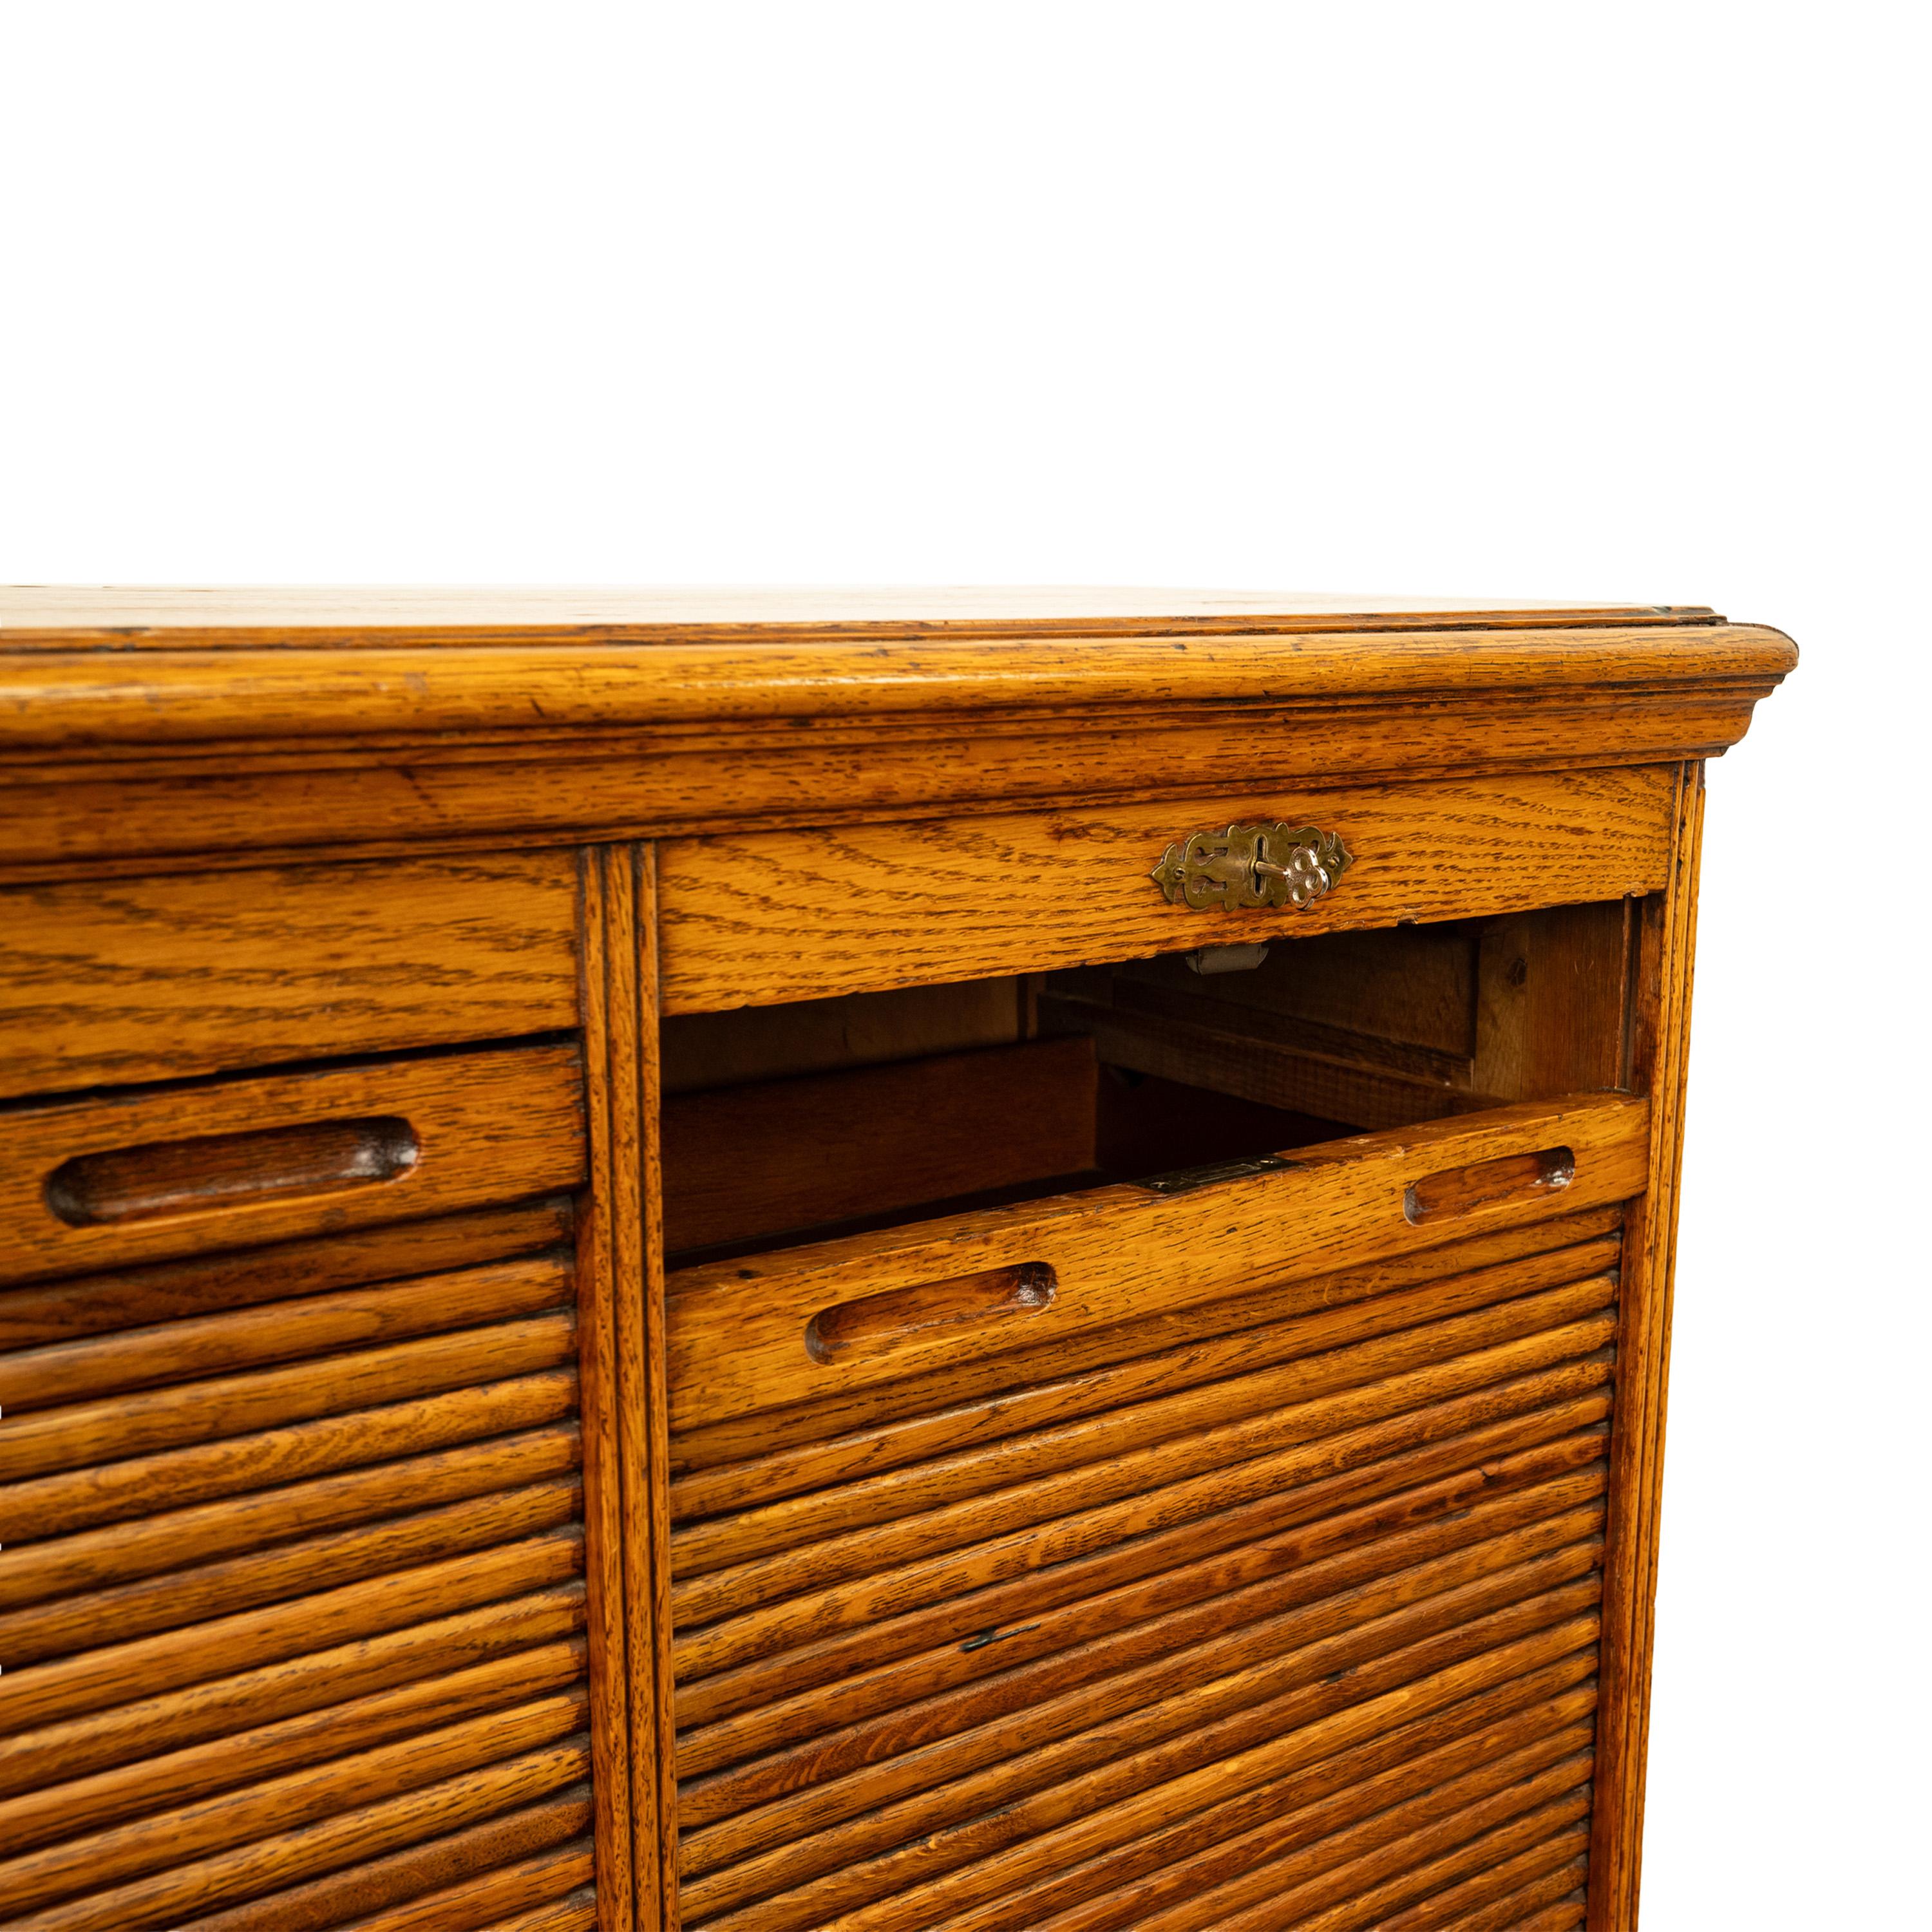 Antique American Oak Double Tambour Roll Top 16 Drawer Filing Cabinet 1910 For Sale 11